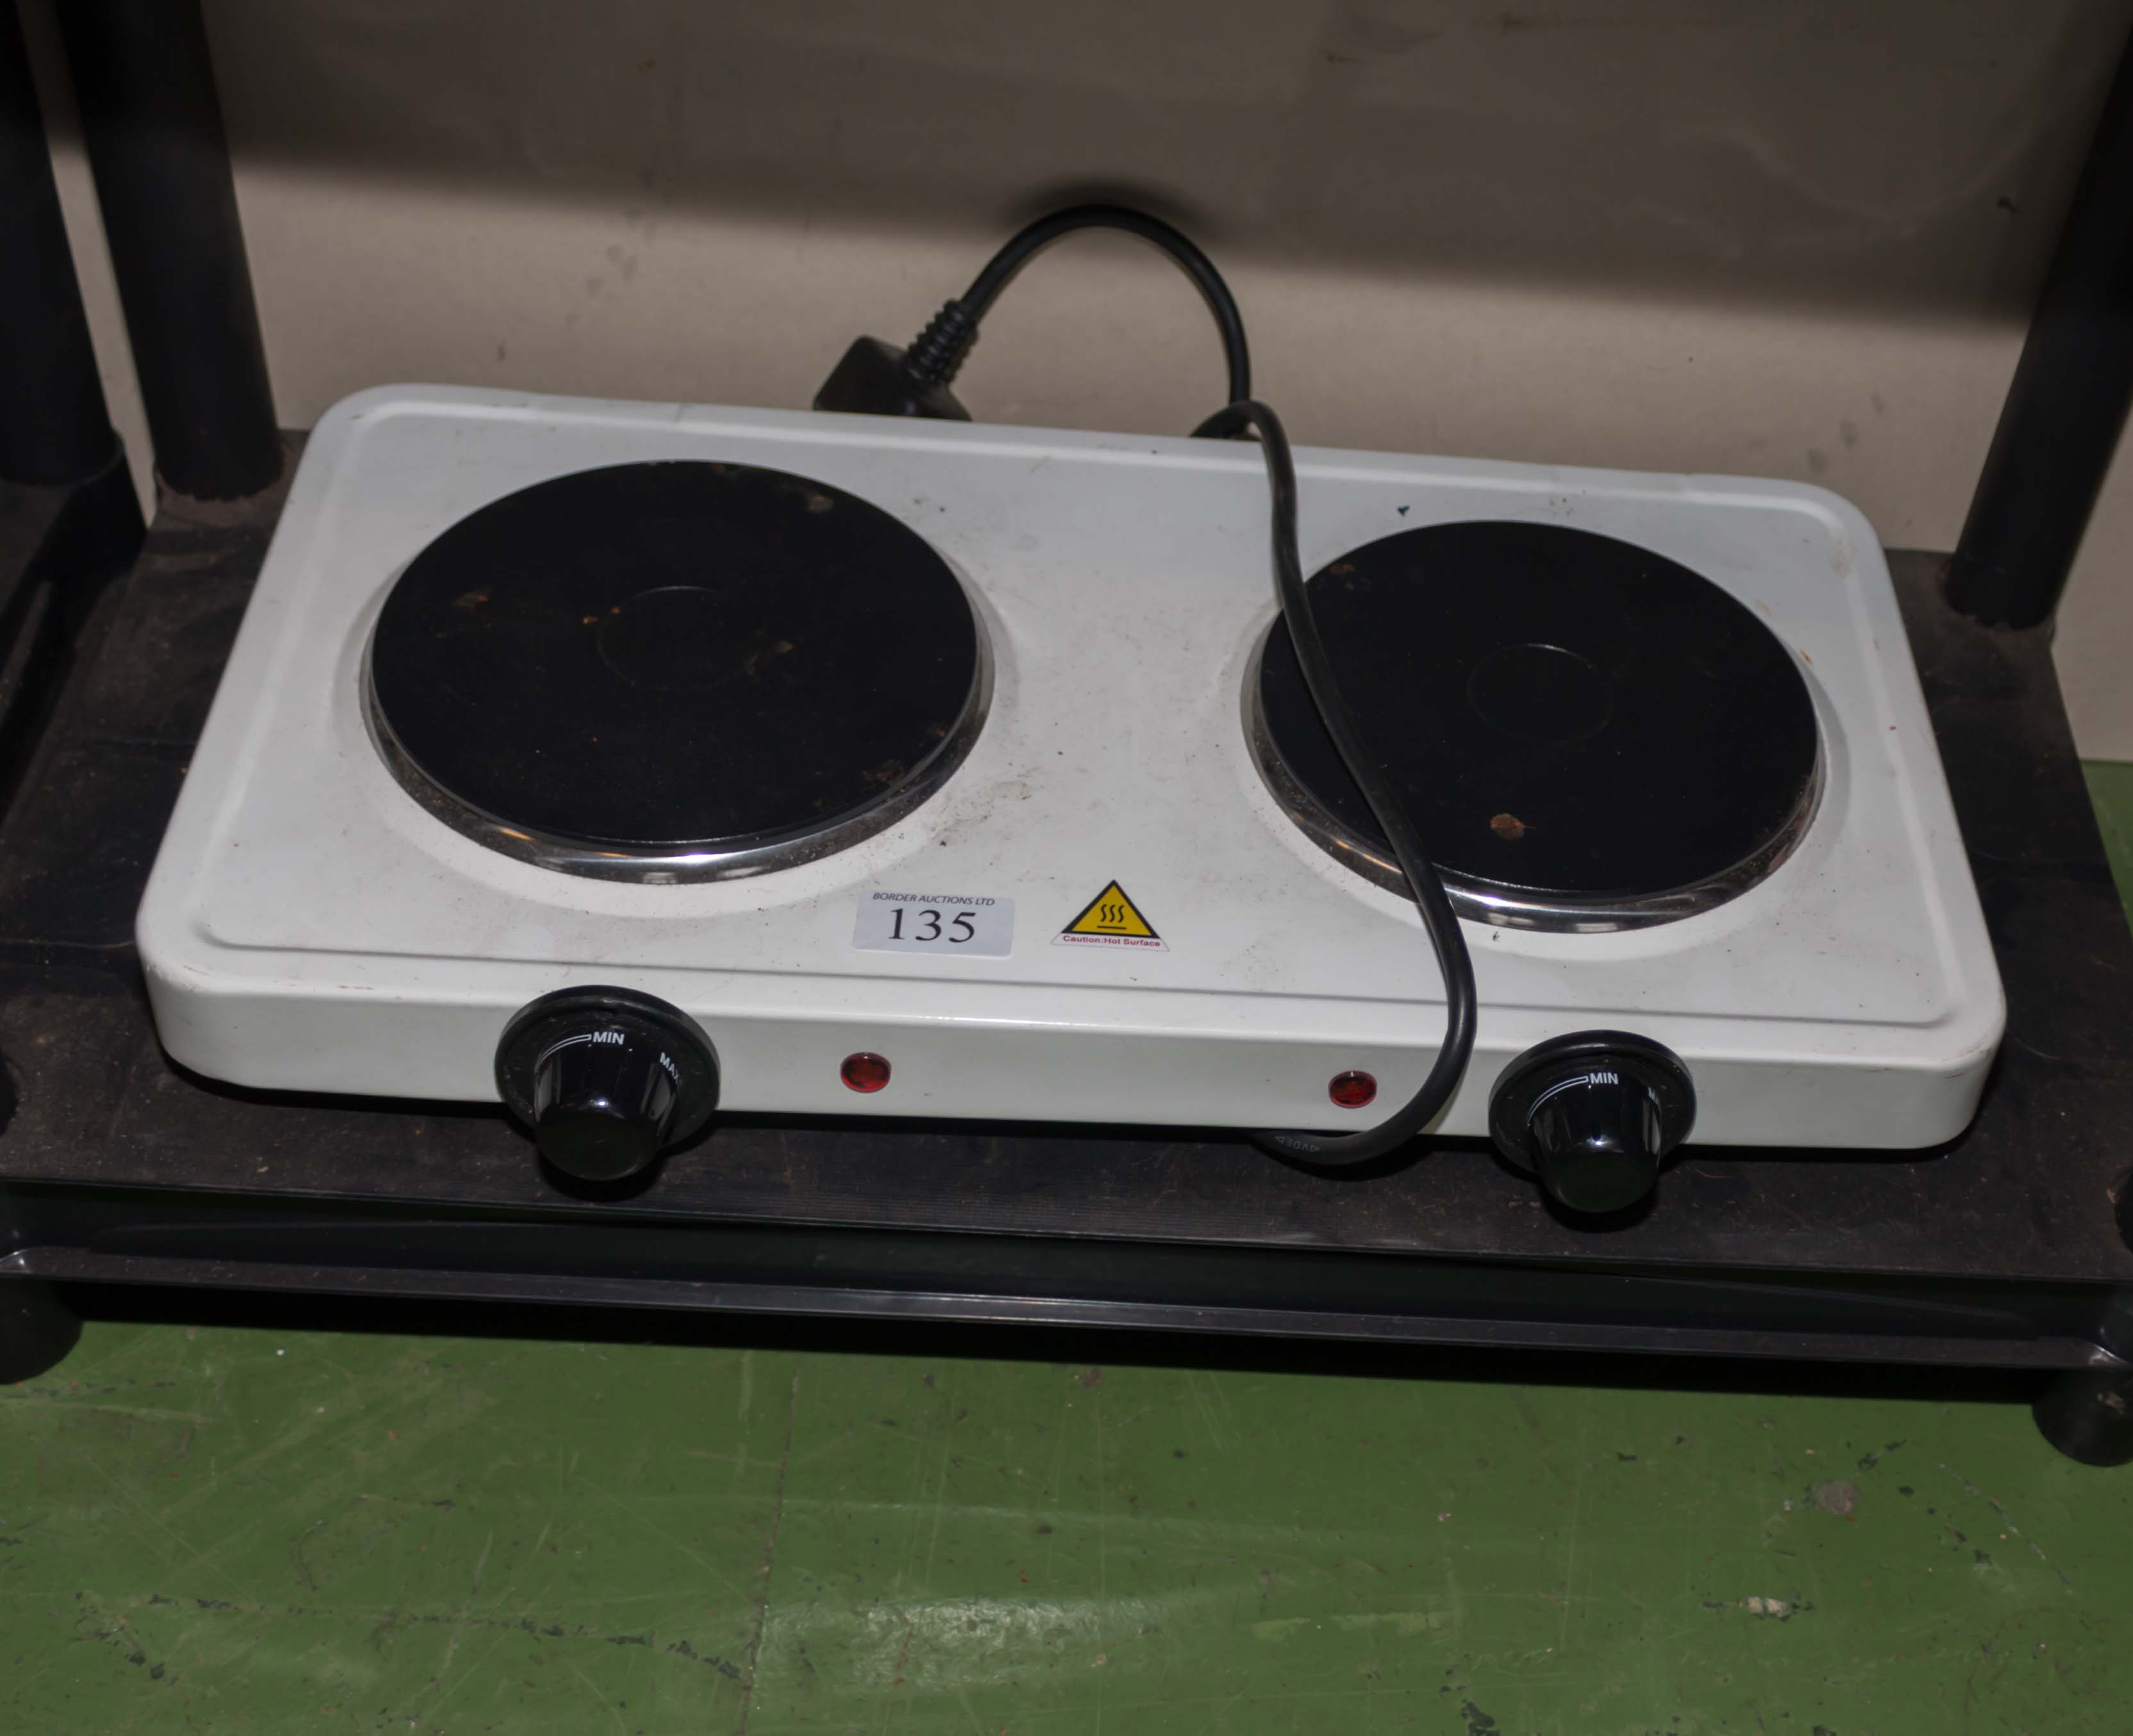 A two ring camping hotplate